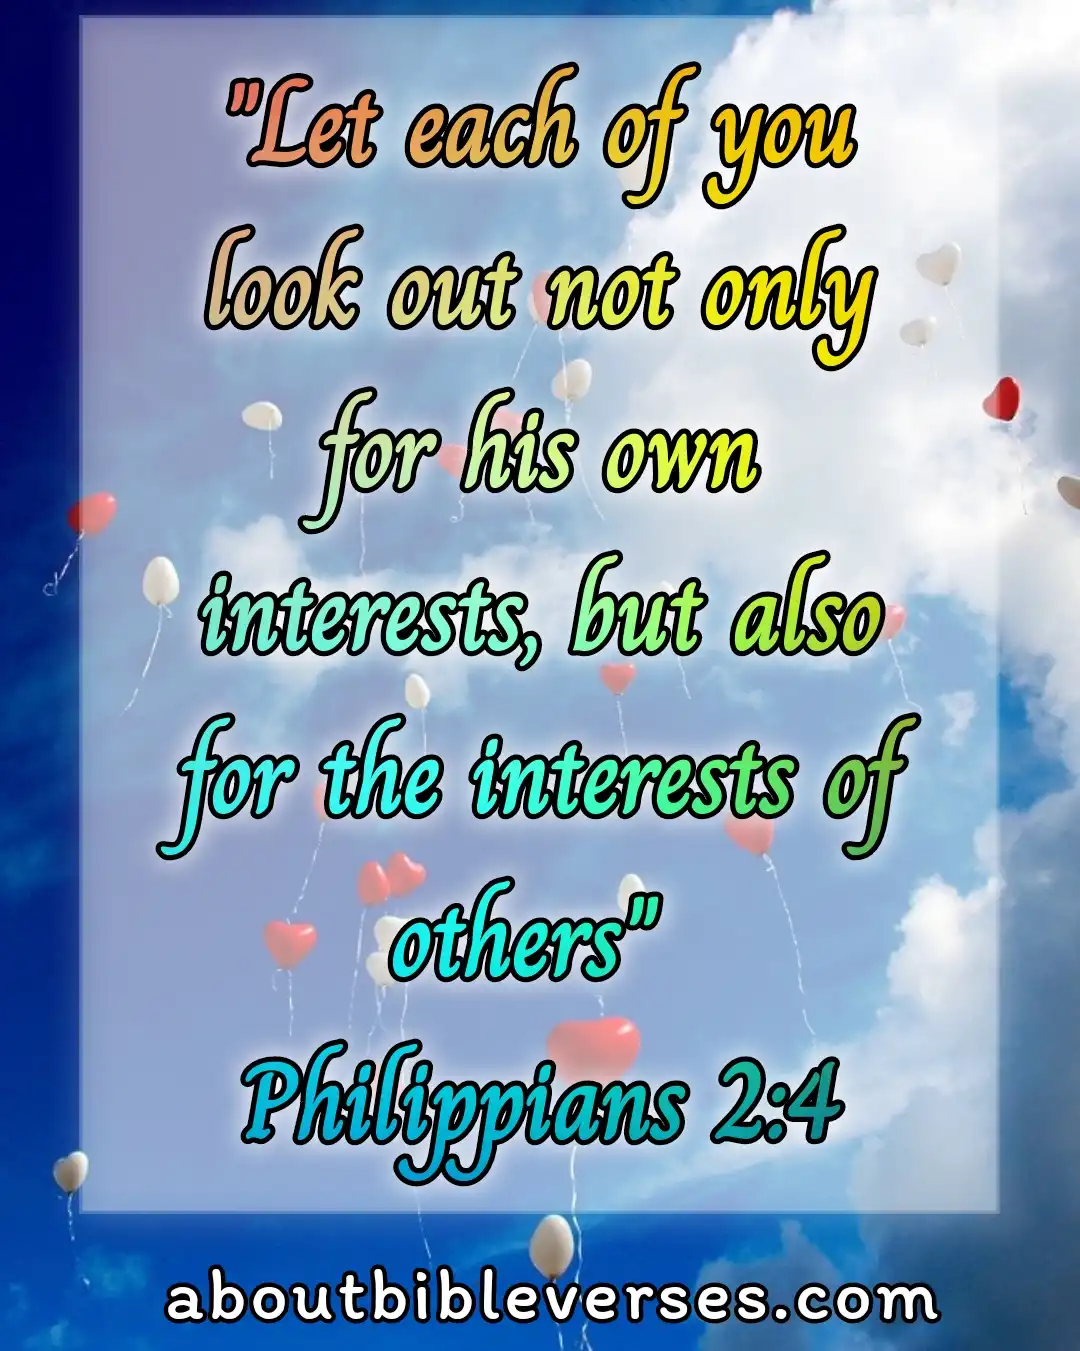 Bible Verse About Success In Business (Philippians 2:4)